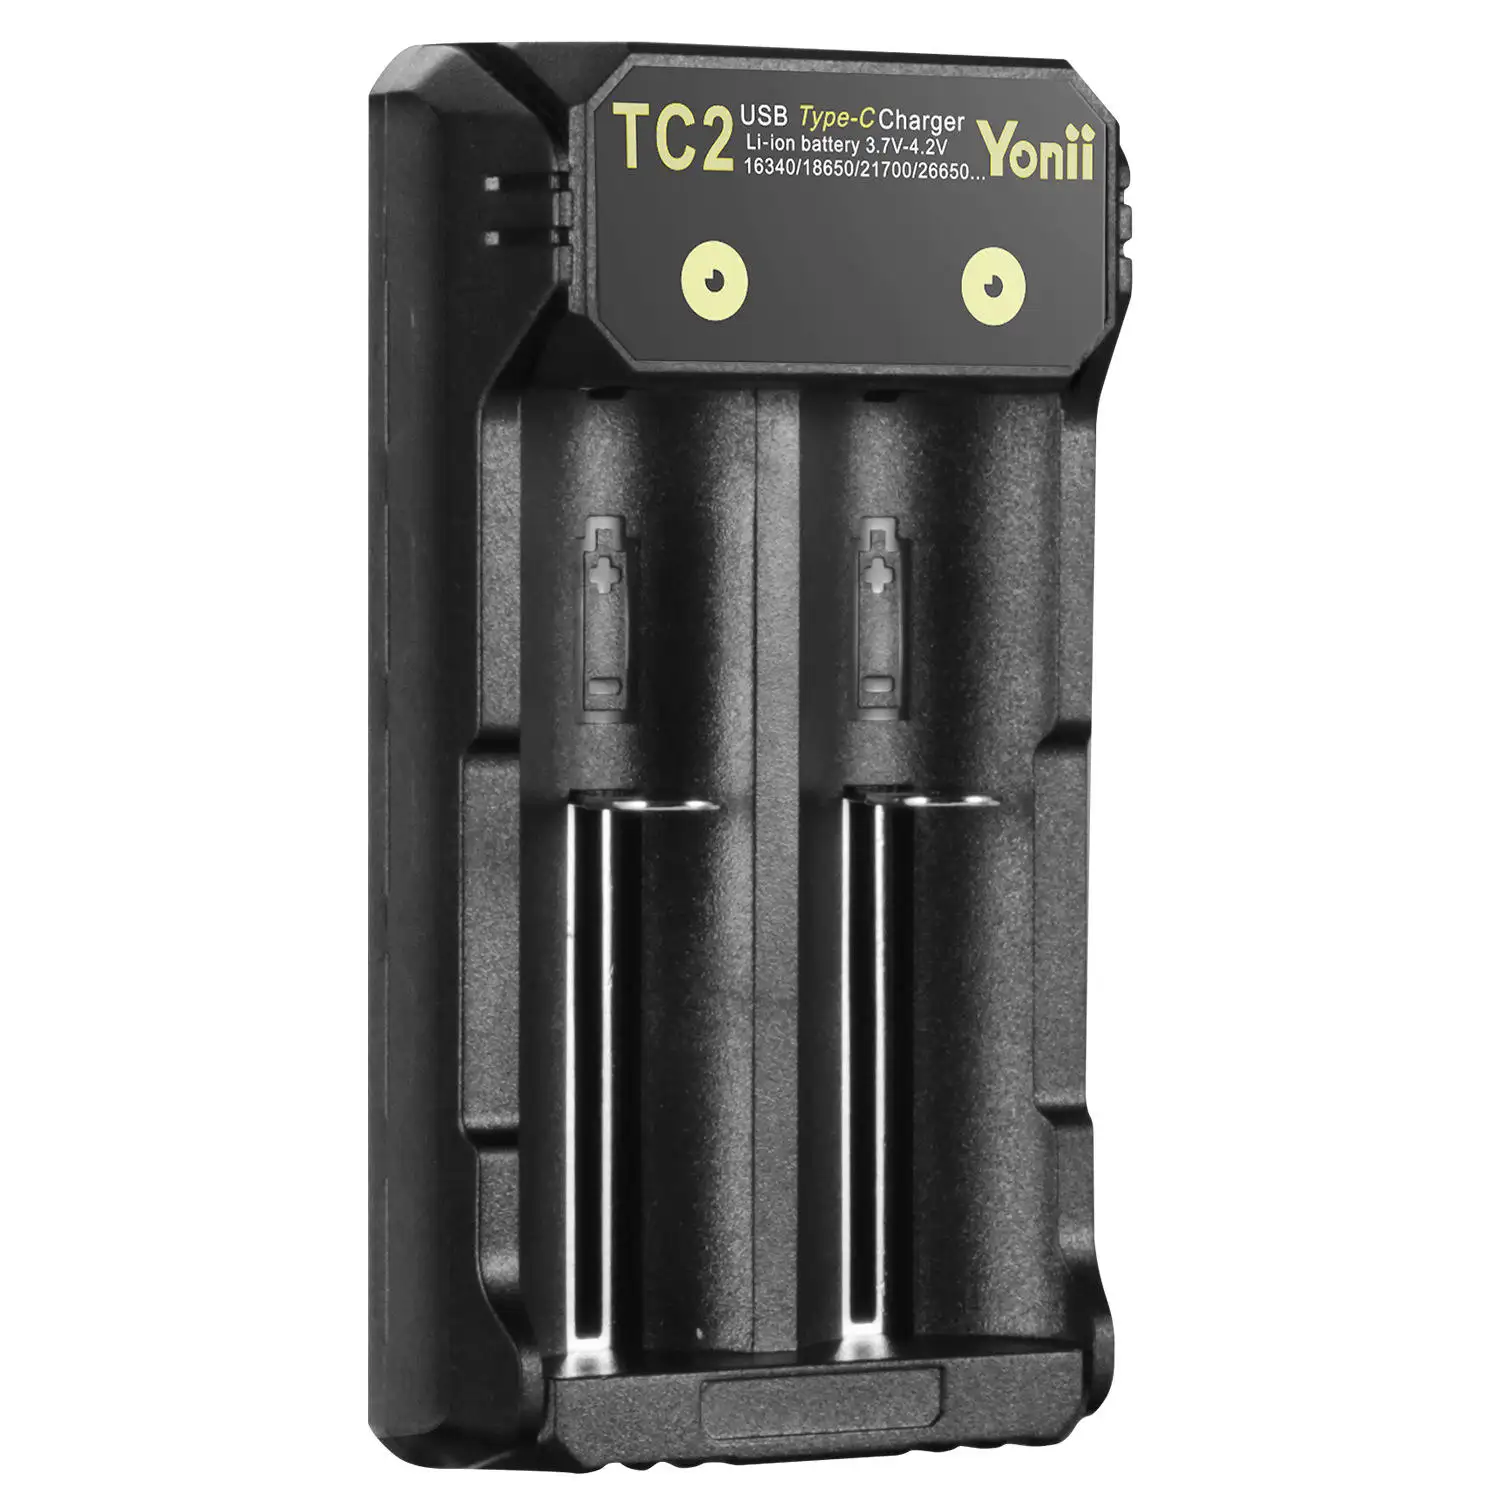 Yonii TC2 Type C 18650 lithium ion battery charger 26650 dual slot flashlight 21700 charger 2A rechargeable battery charger